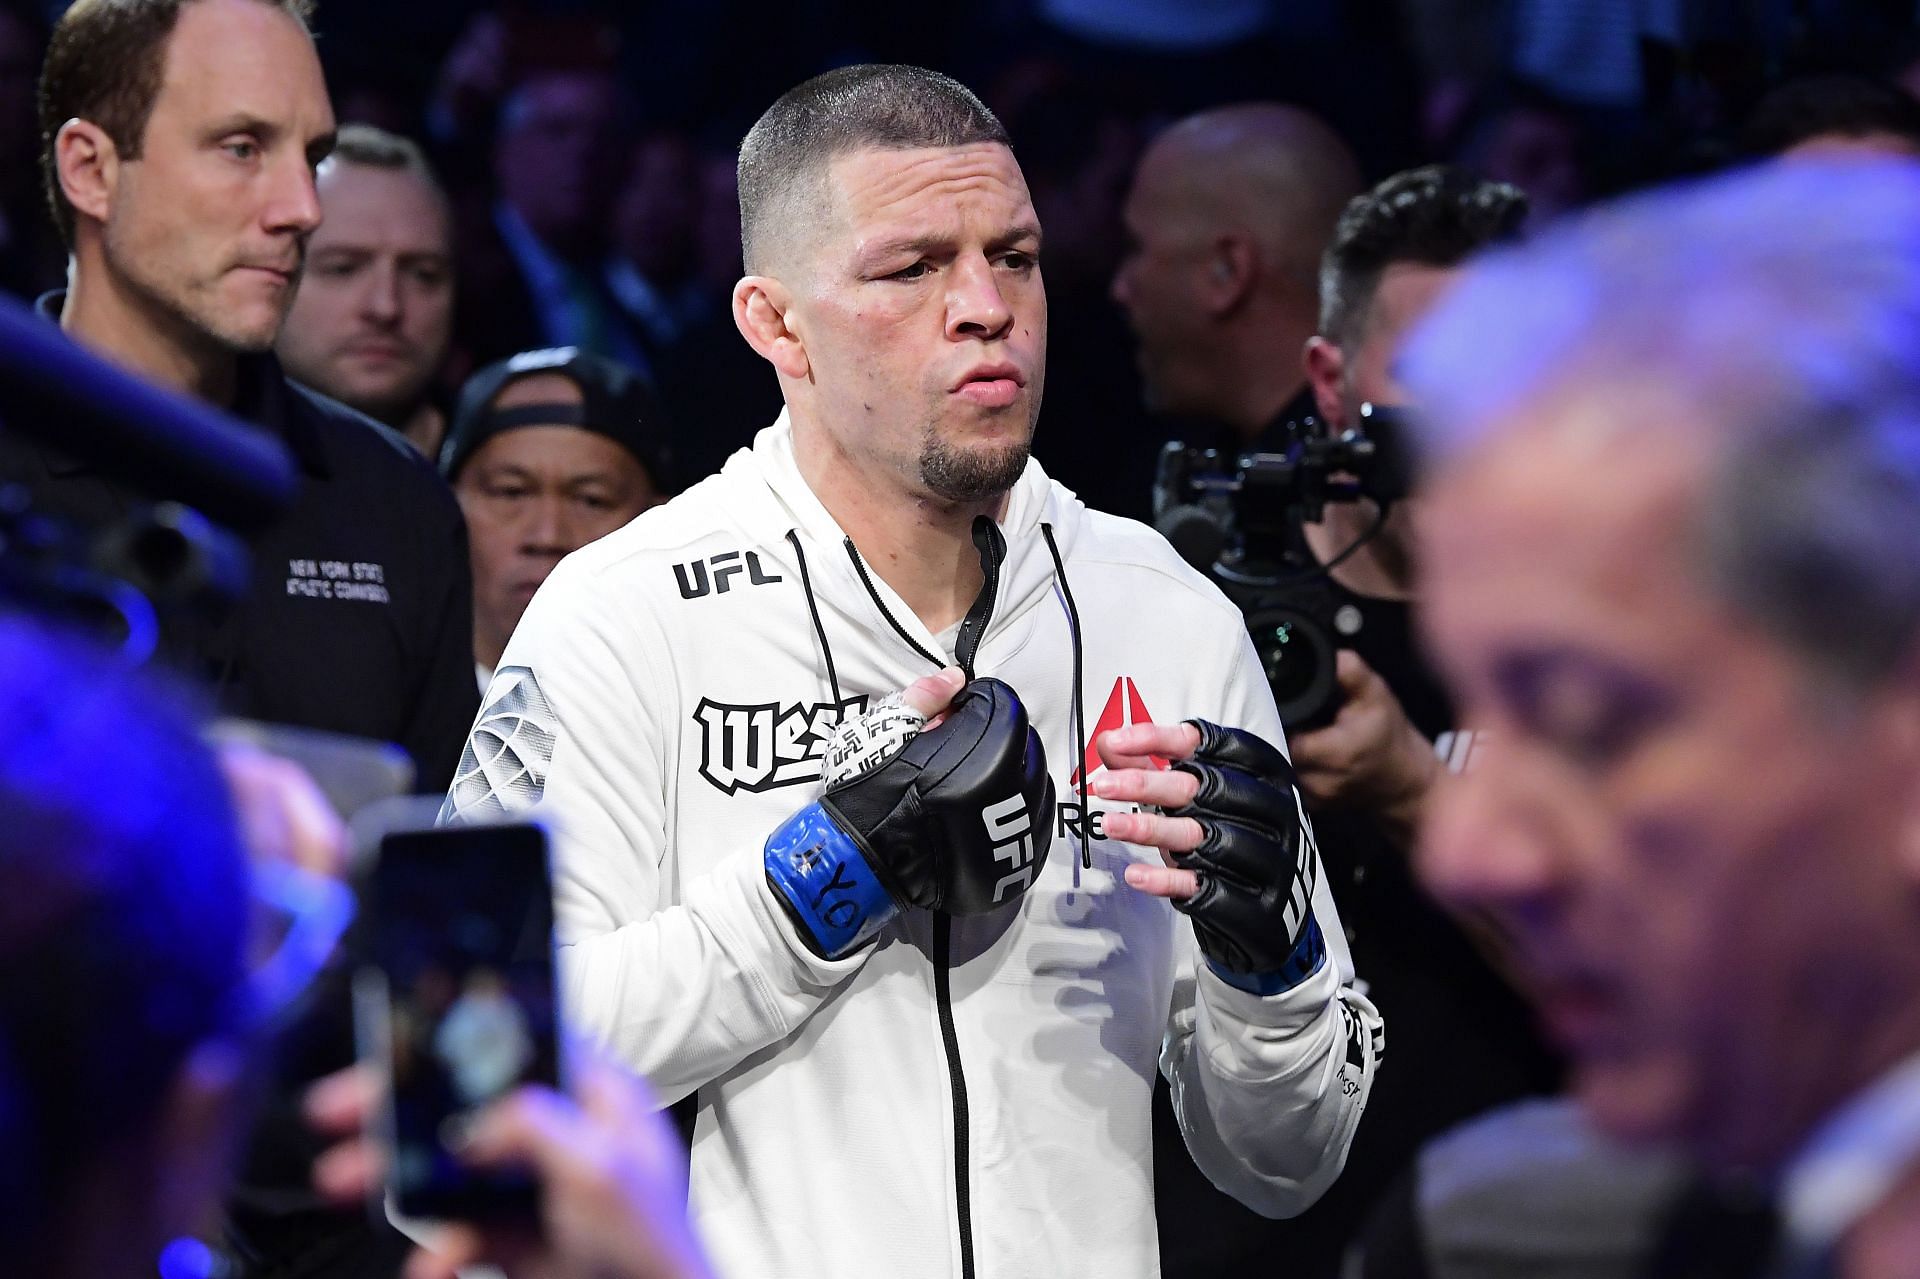 Can Nate Diaz shock the world when he faces Khamzat Chimaev in September?